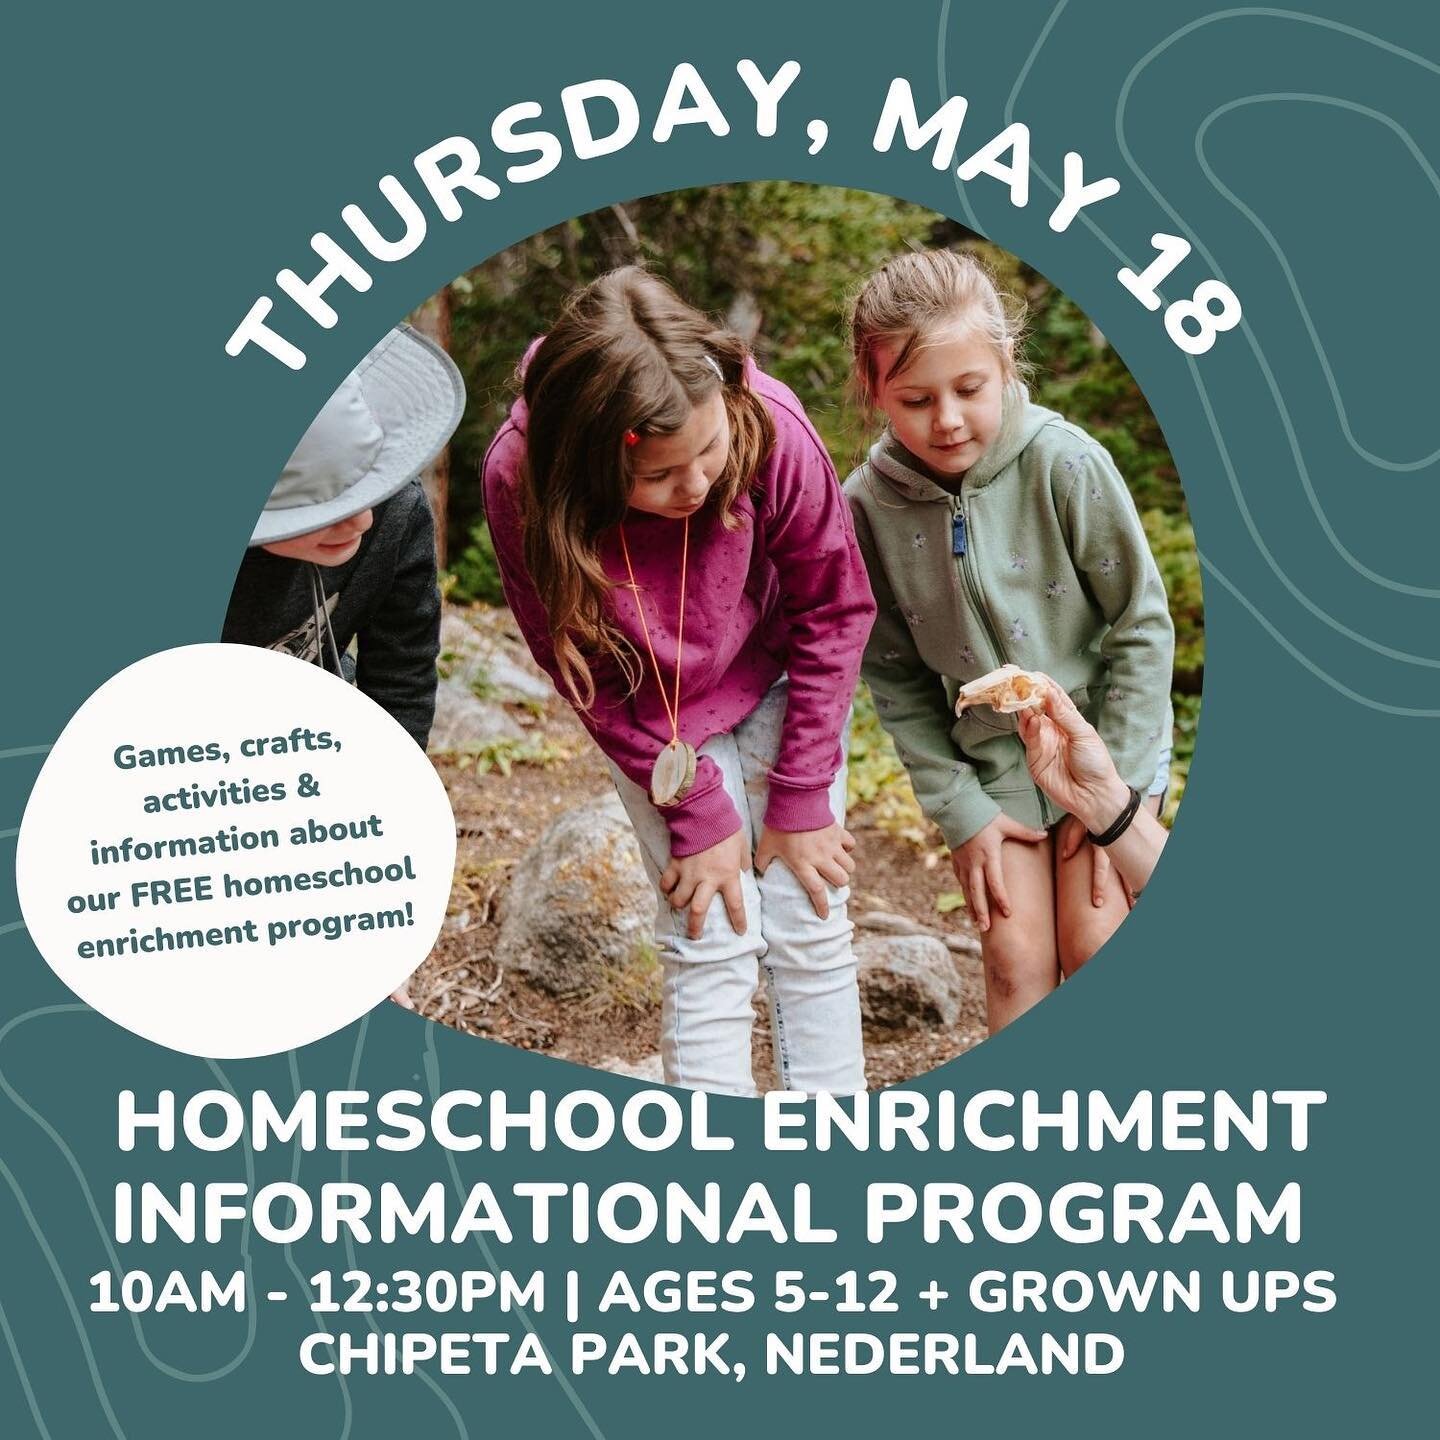 Come with your student to our FREE program on May 18 to see what we do &amp; learn more about our weekly school-year program for homeschoolers.⁠⠀
⁠⠀
Join for games, activities, crafts &amp; information about enrollment!⁠⠀
⁠⠀
Register to let us know y